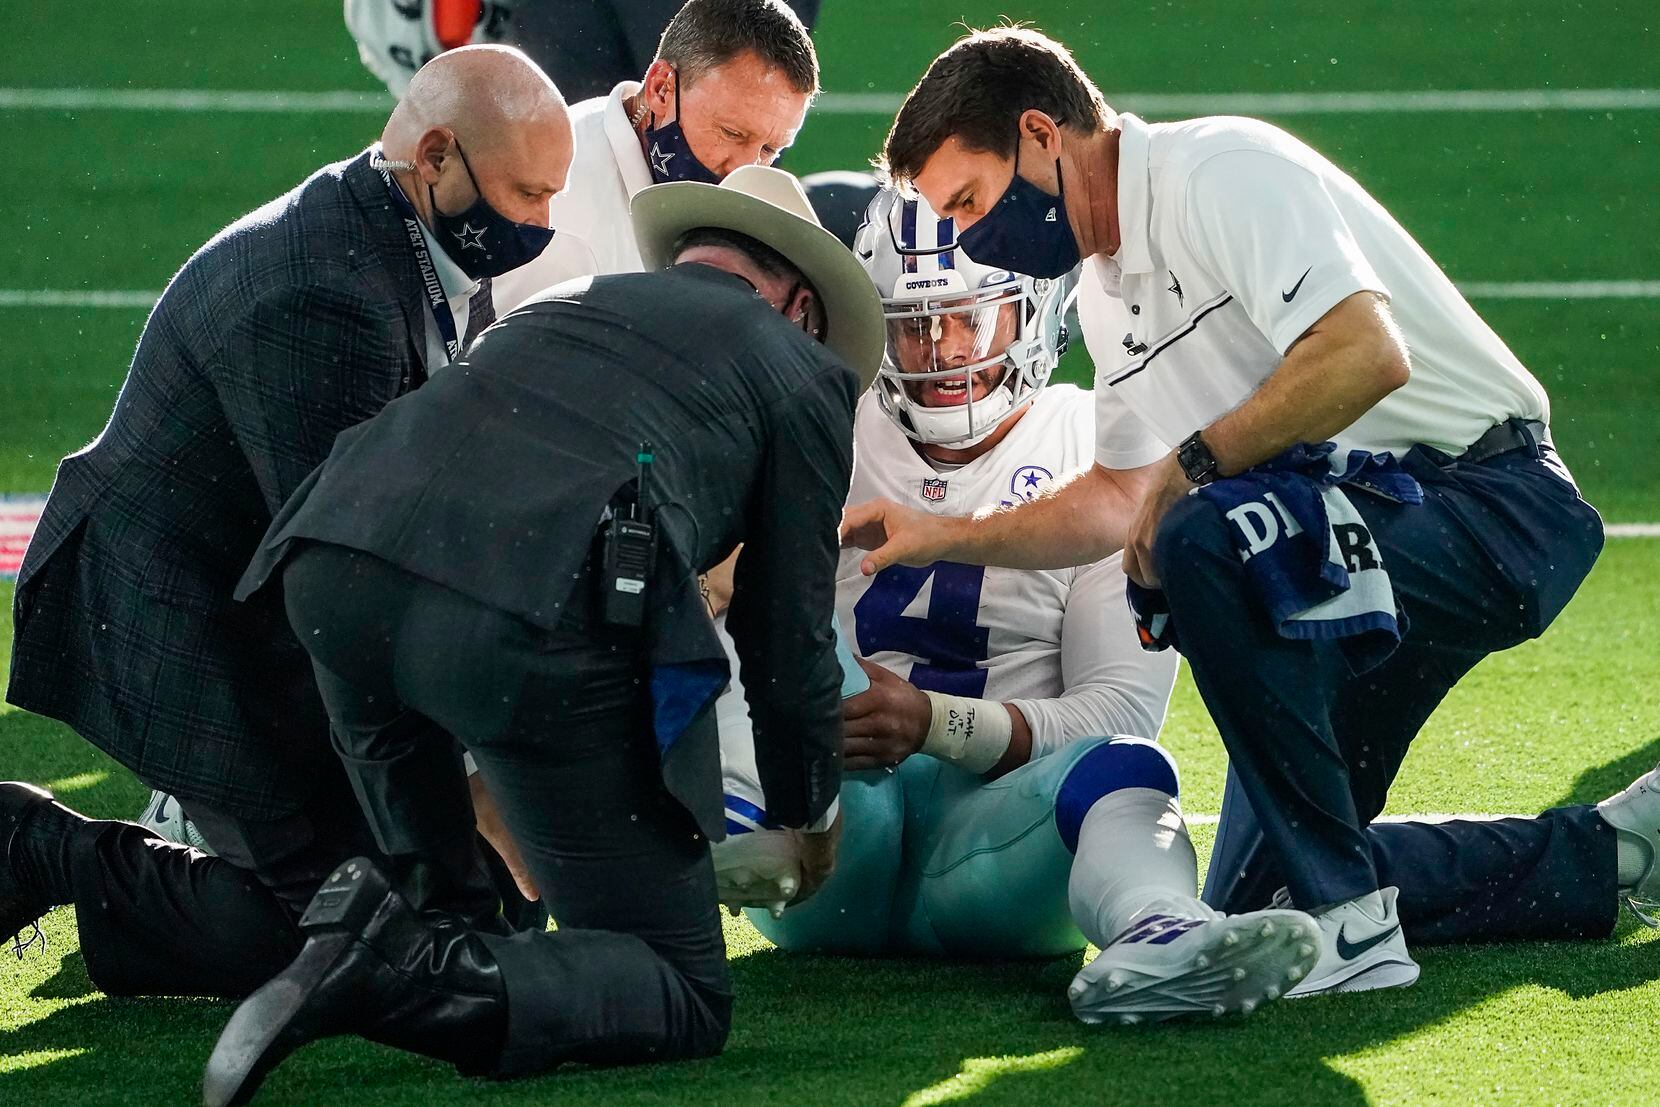 Dallas Cowboys quarterback Dak Prescott receives medical attention after being injured on a tackle by New York Giants cornerback Logan Ryan during the third quarter of an NFL football game at AT&T Stadium on Sunday, Oct. 11, 2020, in Arlington. Prescott was injured o the play when Ryan came down on his right leg and left the game. (Smiley N. Pool/The Dallas Morning News)